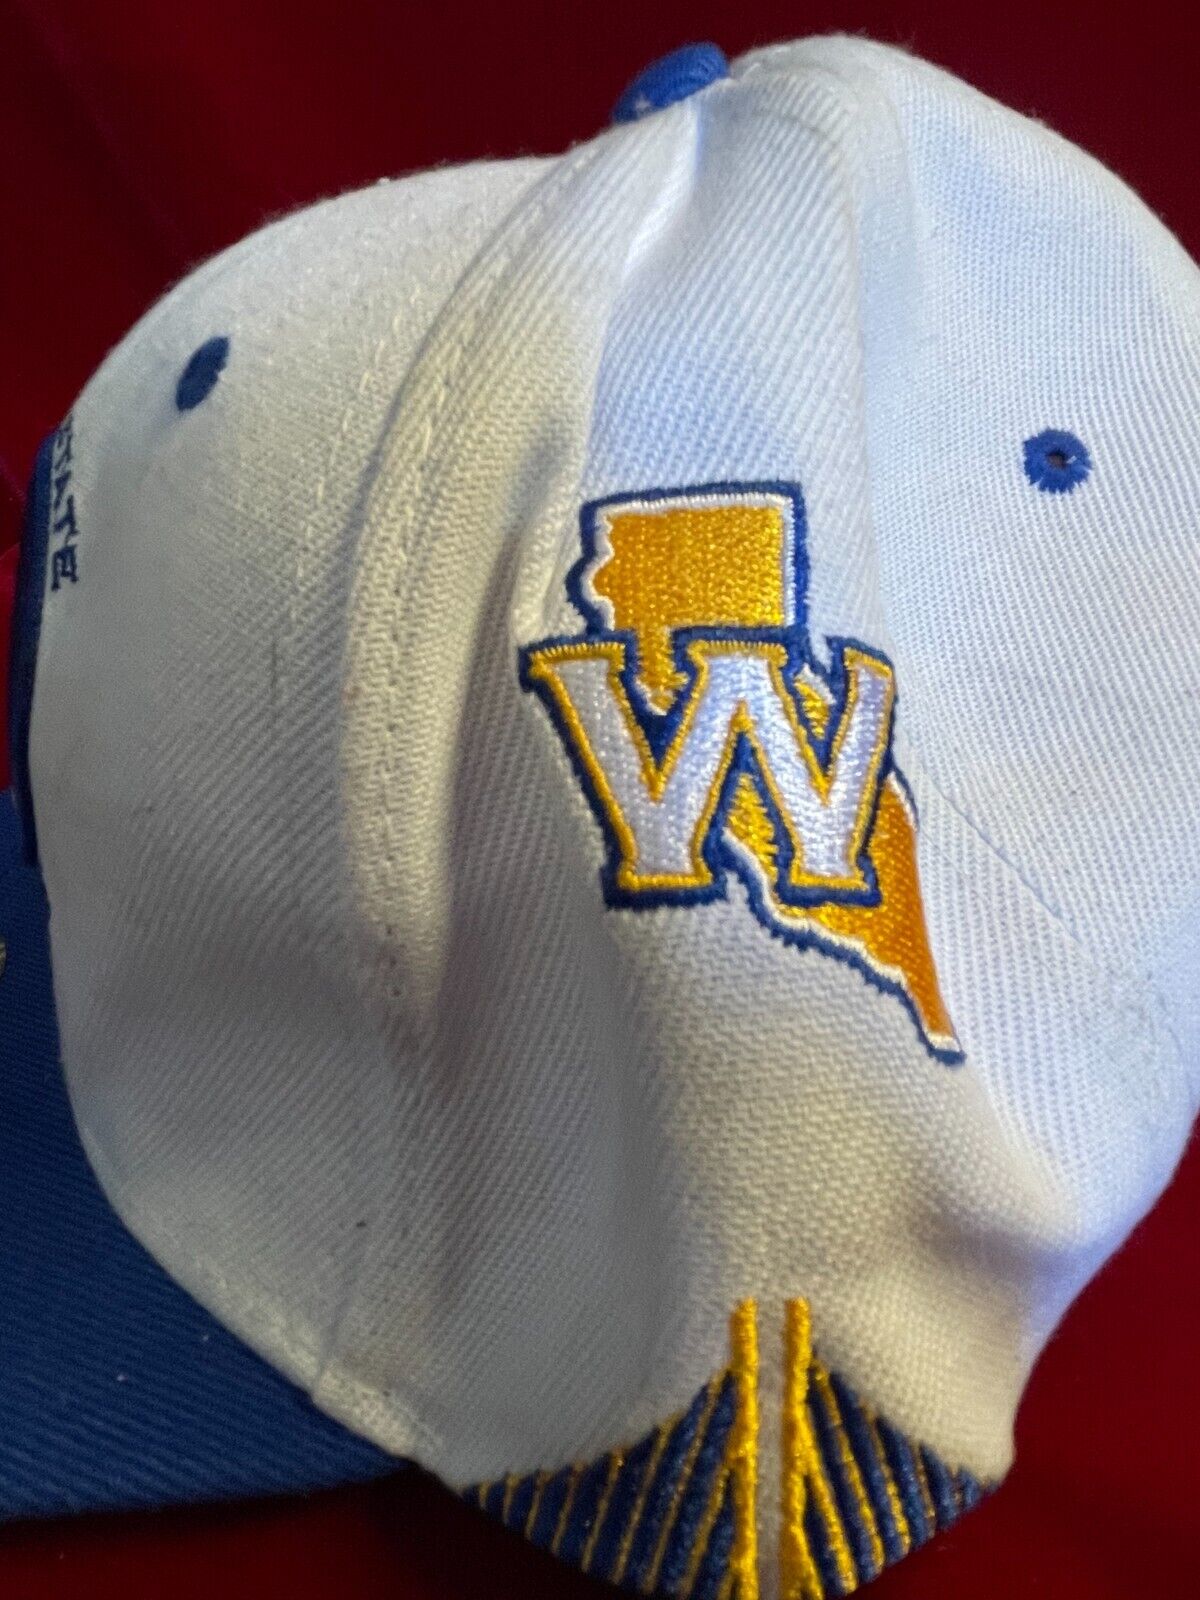 Mitchell And Ness Golden State Warriors Snapback EUC